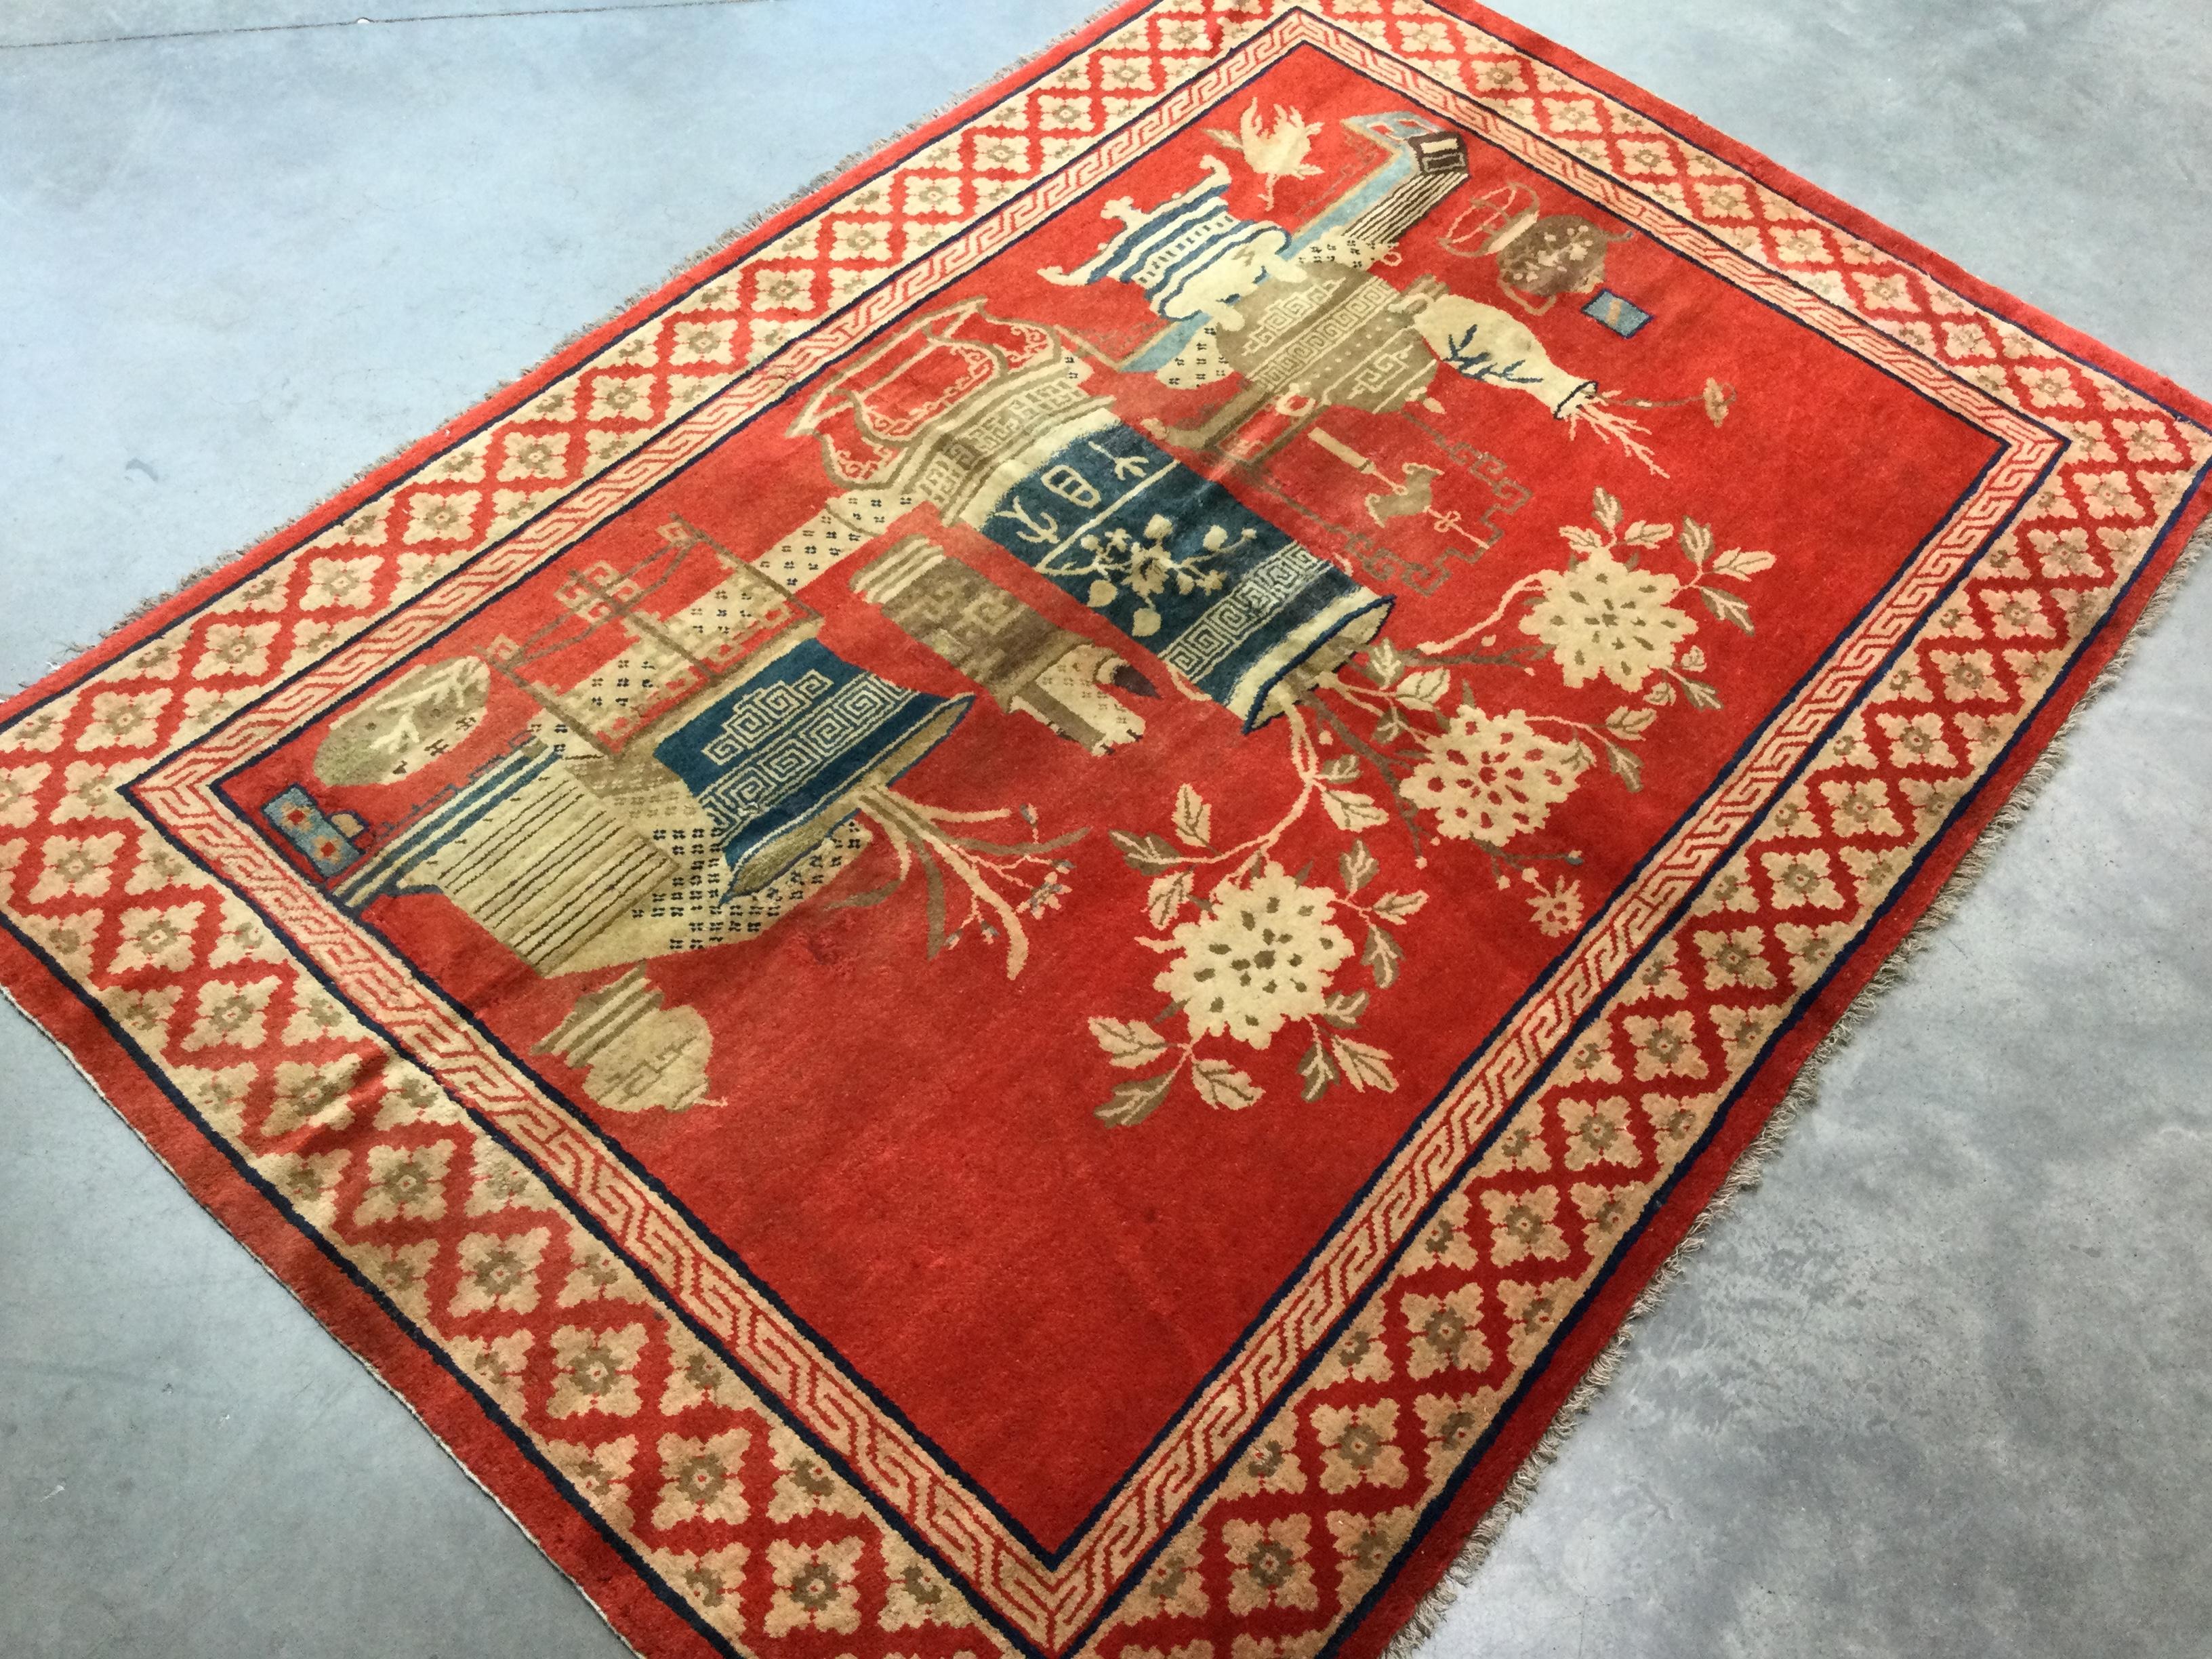 Hand-Knotted Antique Wool Rug. 1.90 x 1.30 m. For Sale